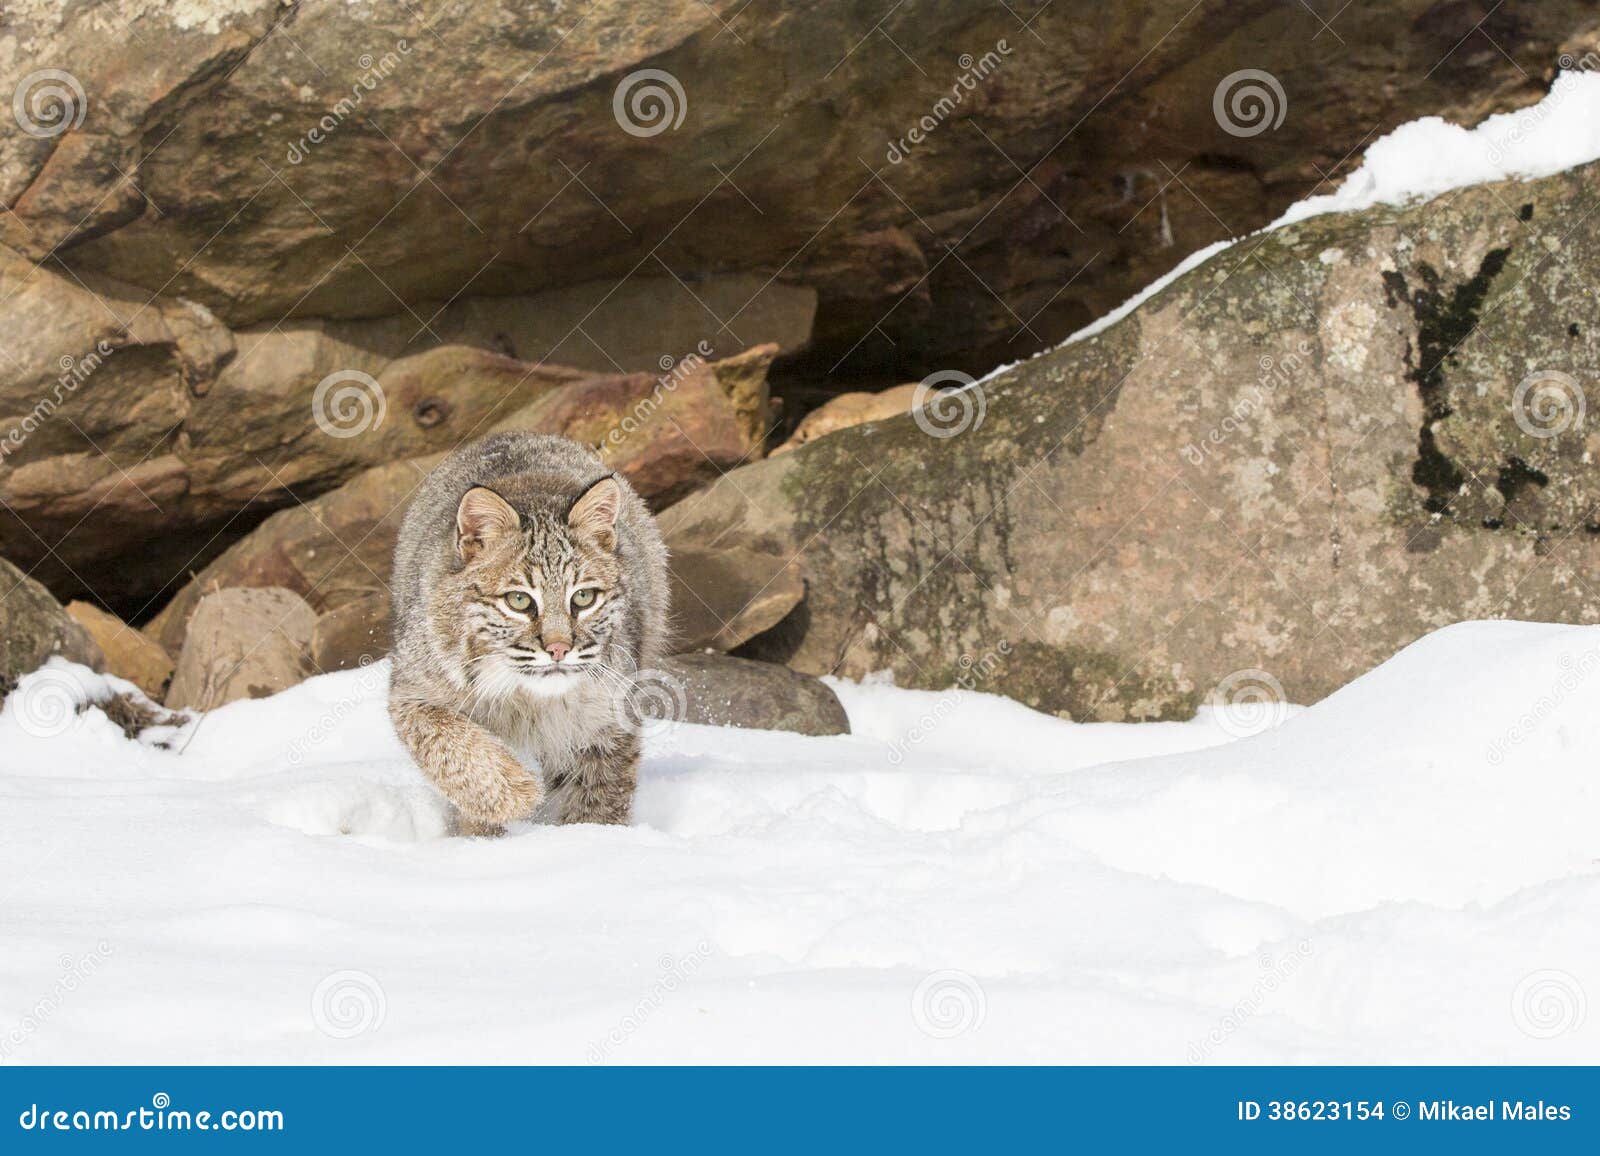 its time for this bobcat to pounce on prey